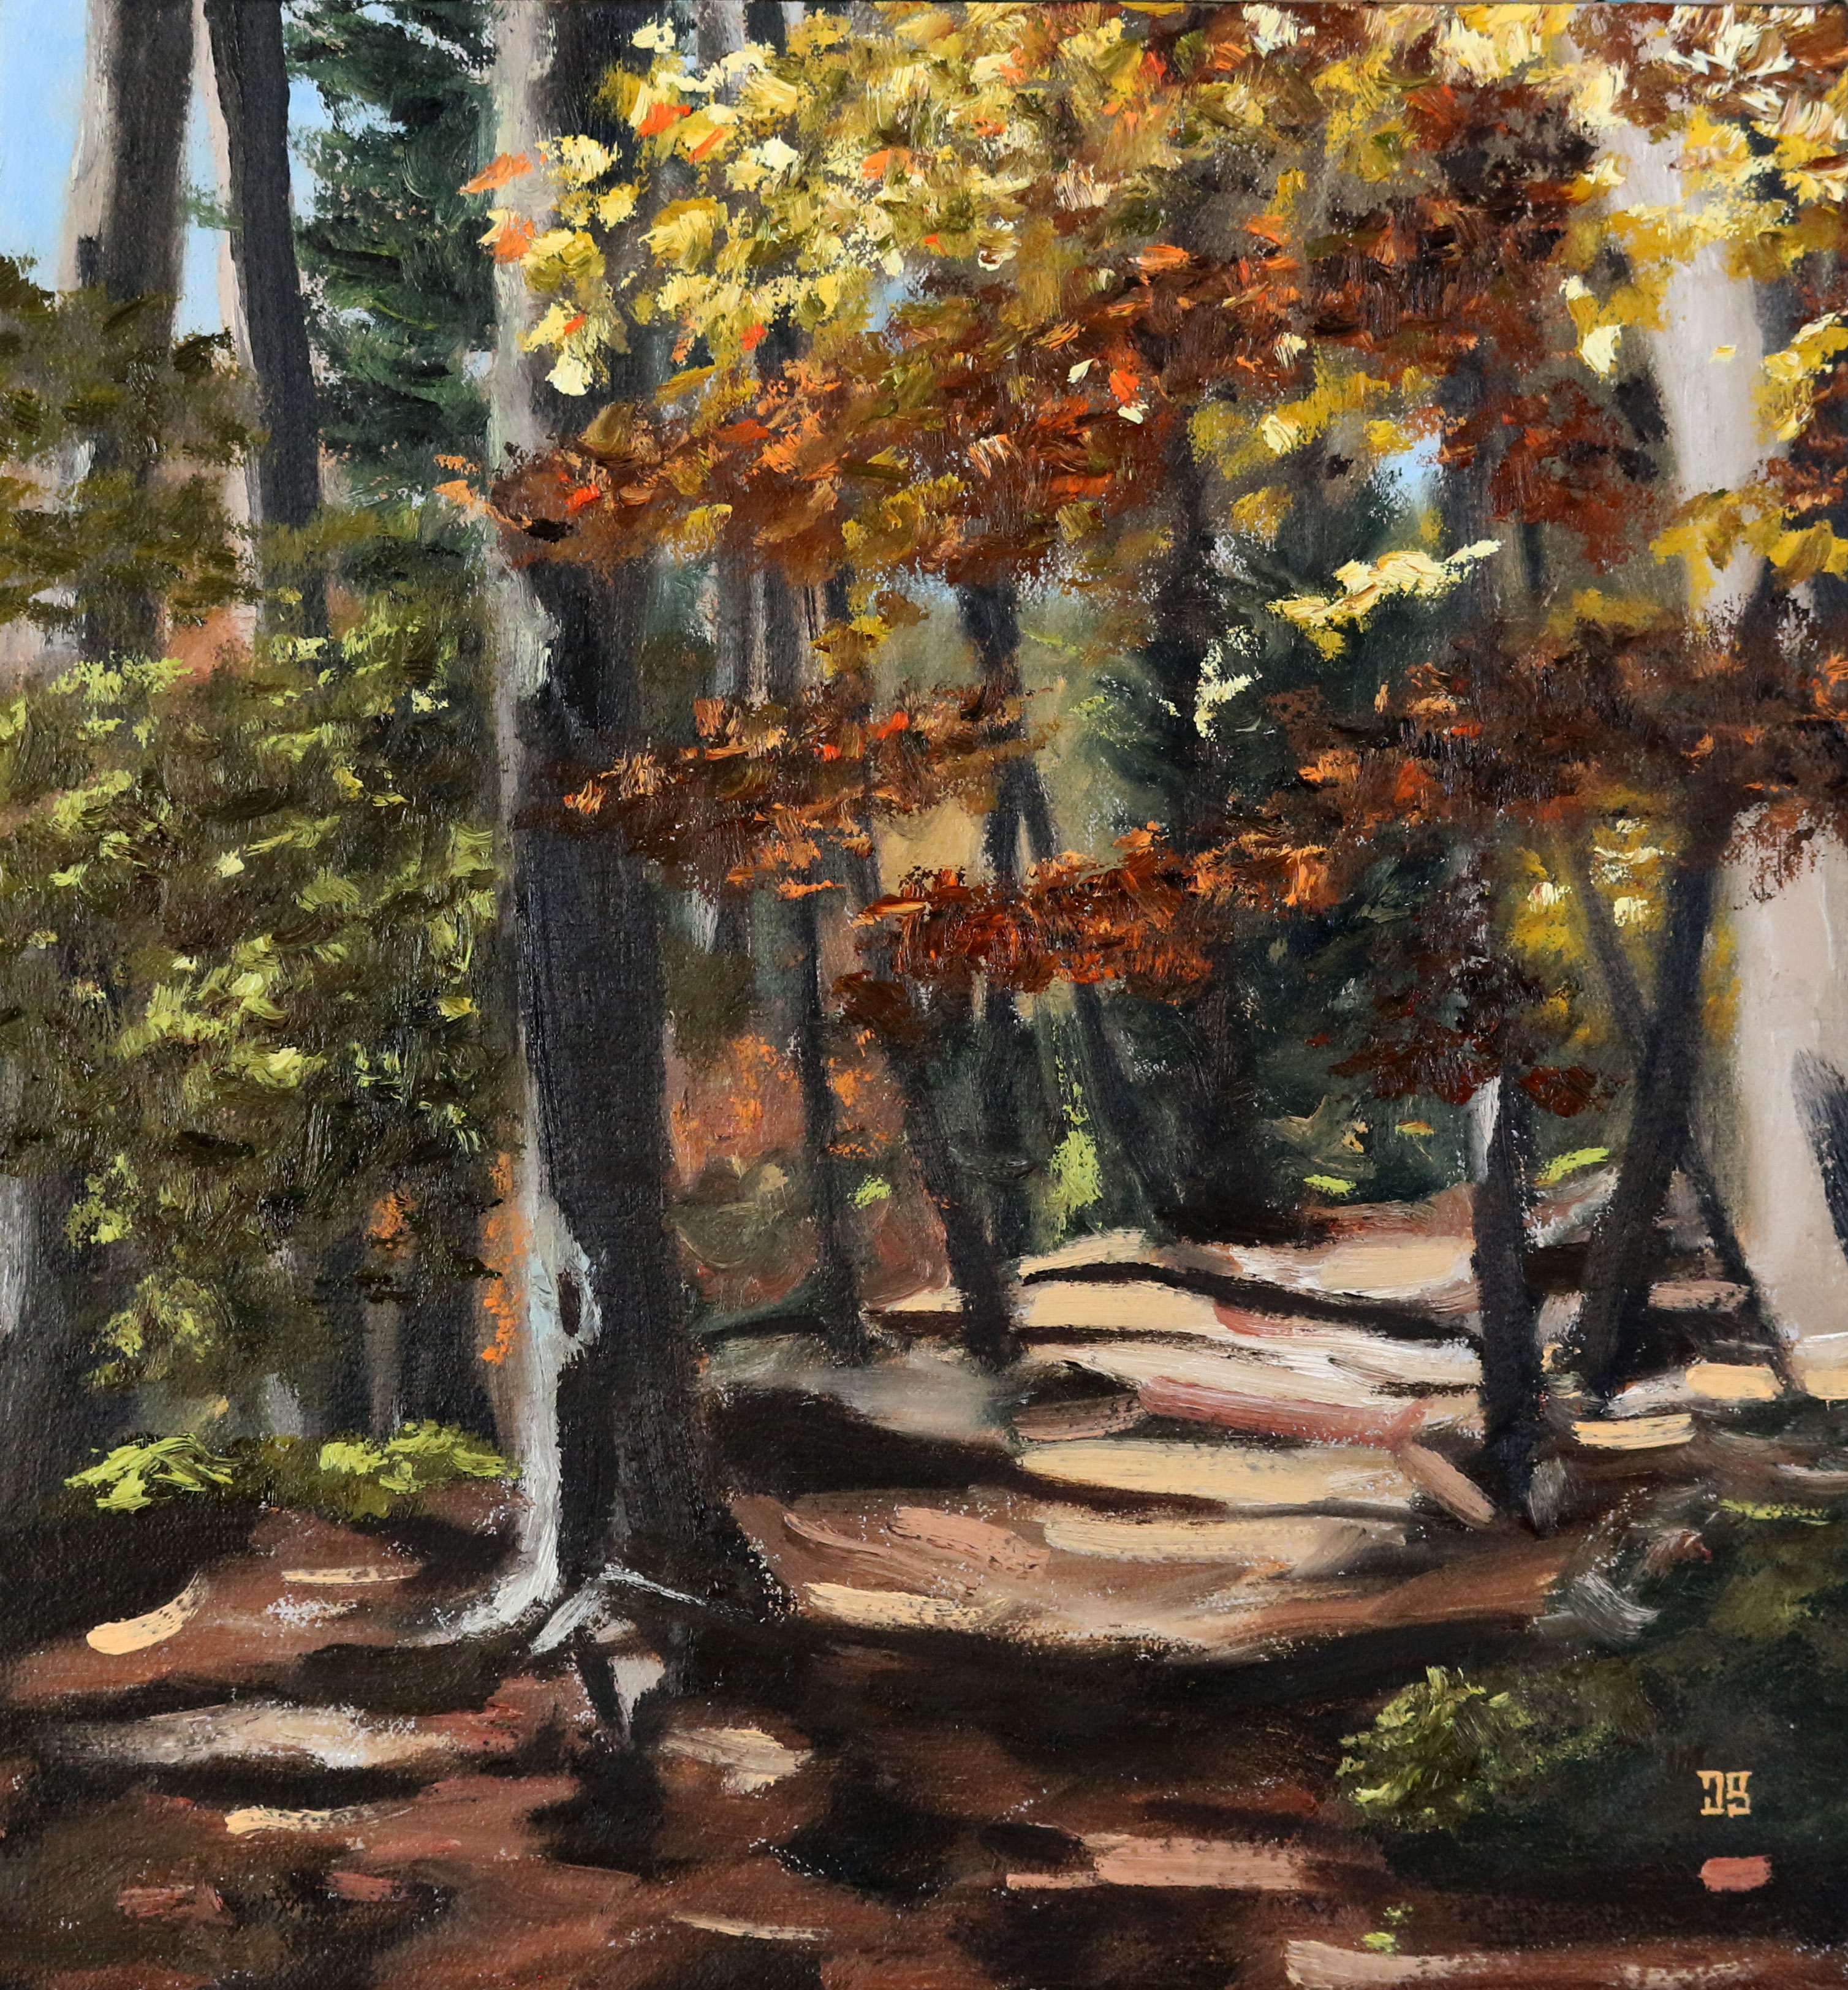 Oil painting "Autumn Trail" by Jeffrey Dale Starr